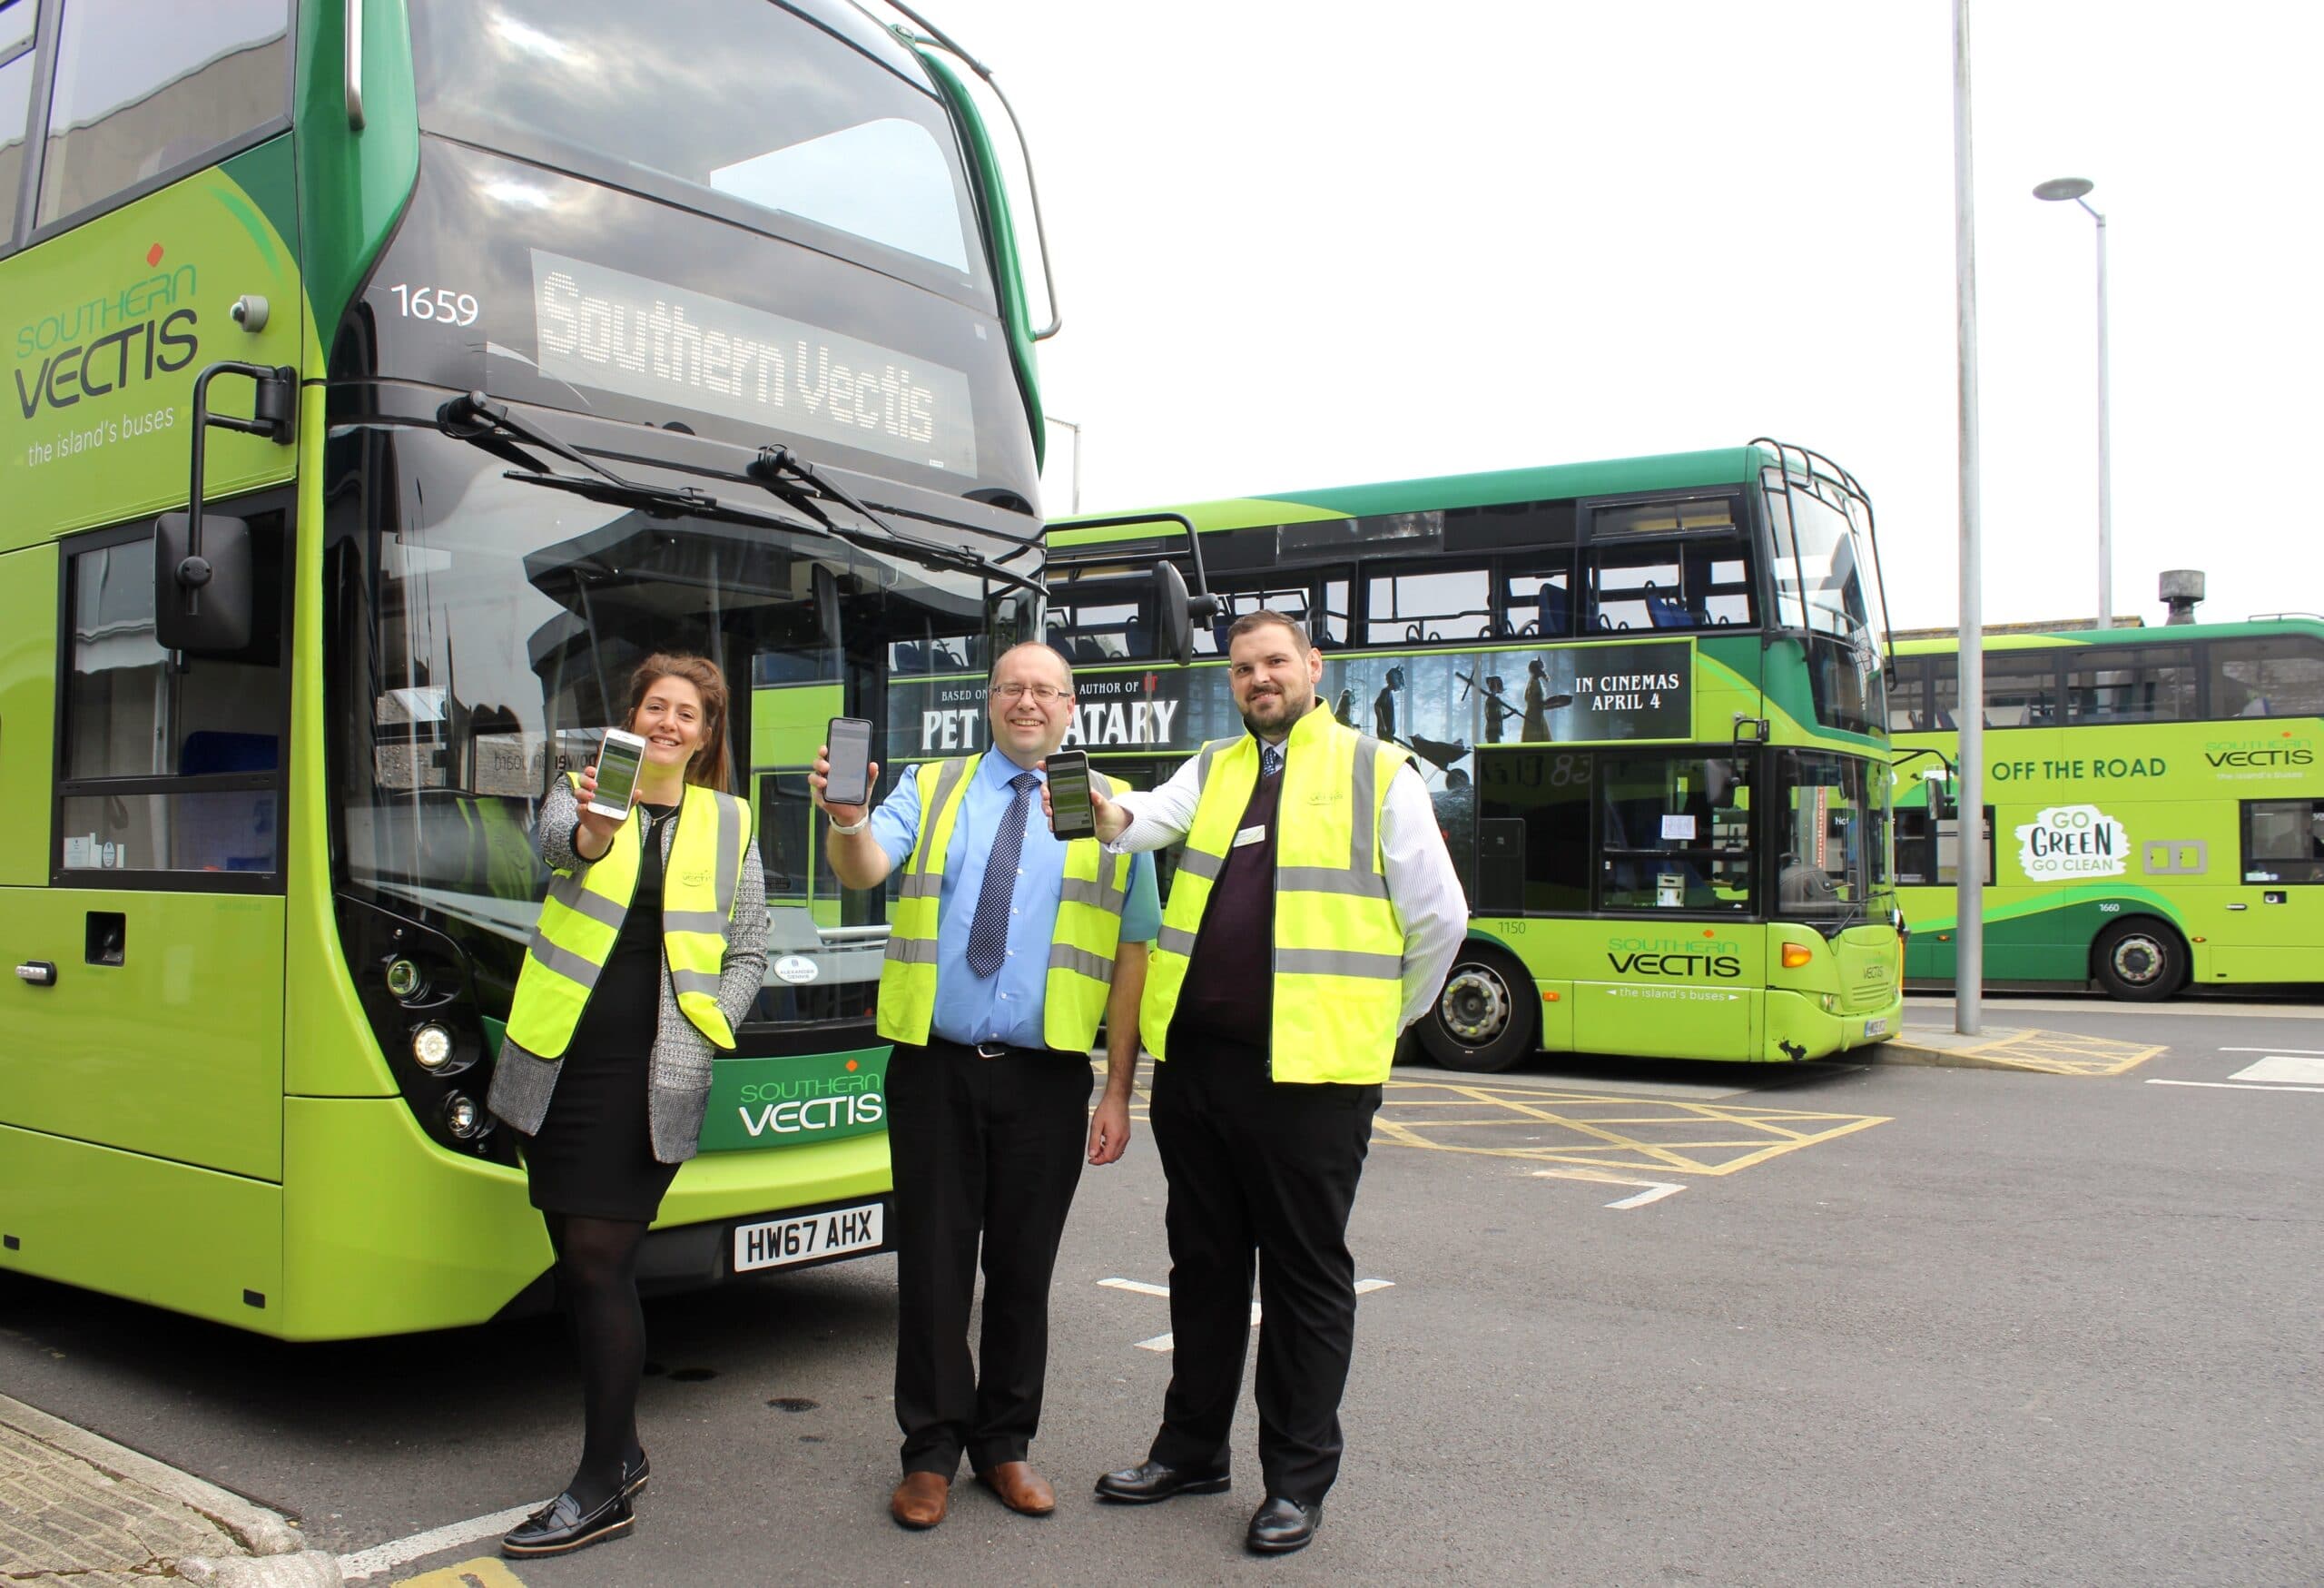 local Vectis team holding up mobiles with new website on display, in front of fleet